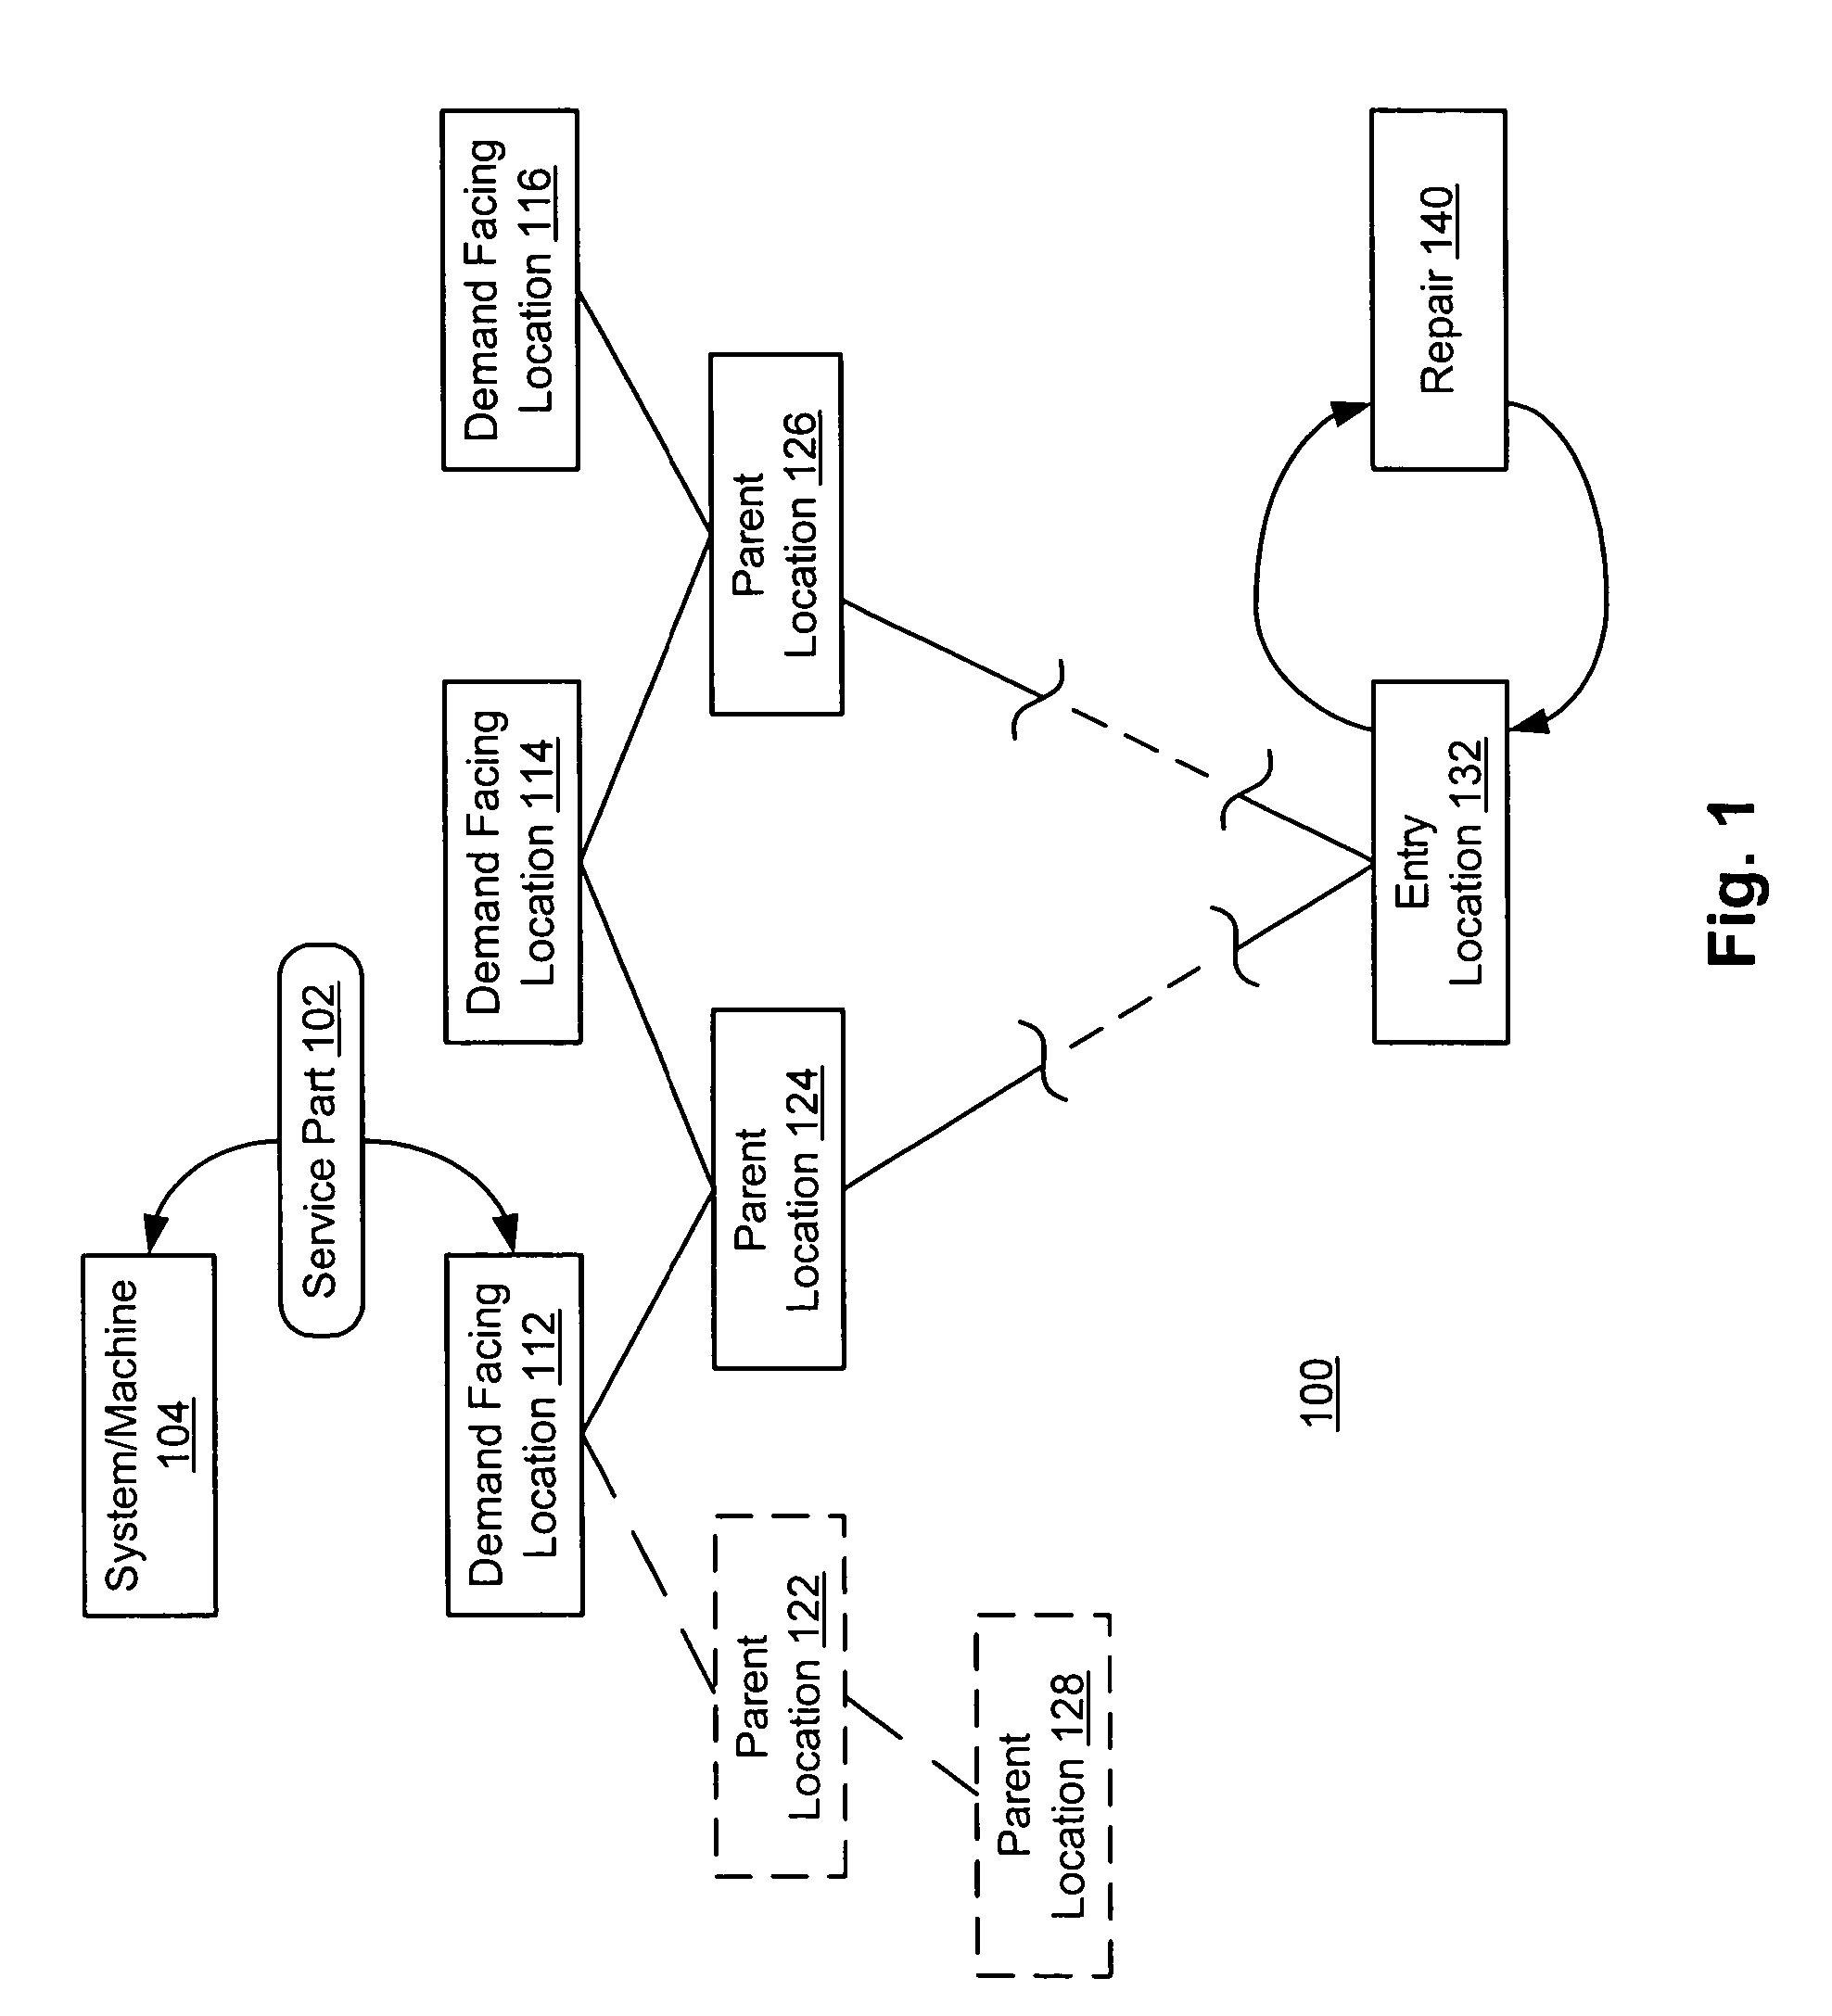 System and method for service parts planning in a multi-echelon network